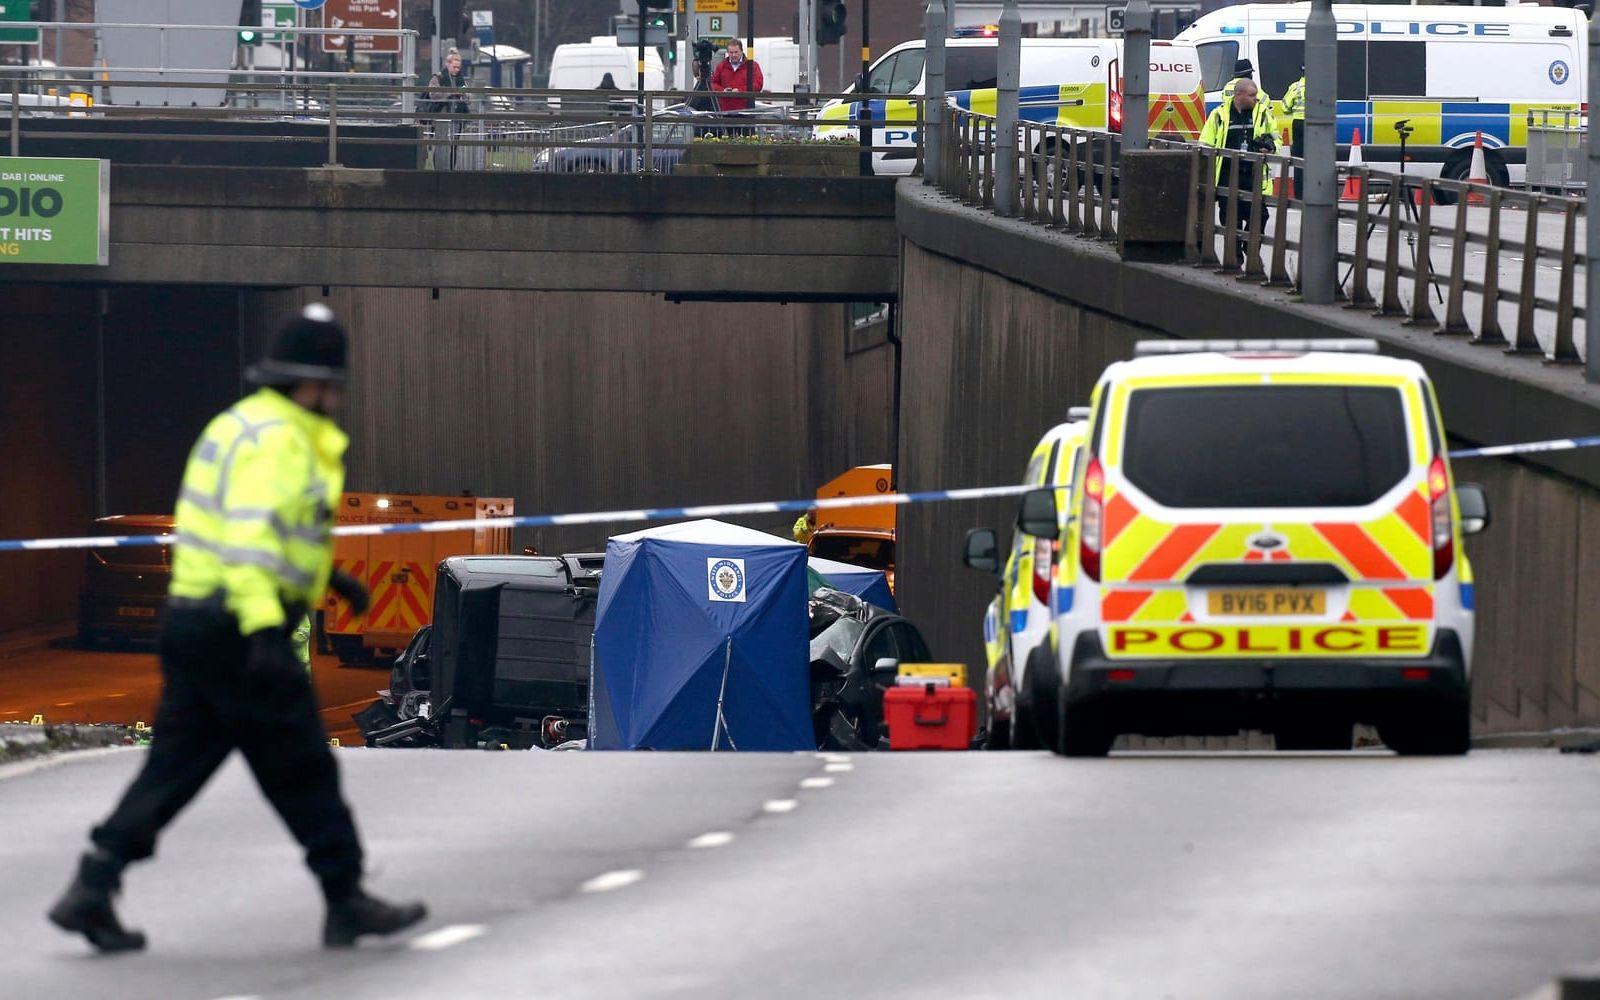 Emergency vehicles attend the scene of a multi vehicle crash at the entrance of an underpass near Edgbaston, in Birmingham, England, Sunday Dec. 17, 2017, which left six people dead and a seventh critically injured. (Aaron Chown/PA via AP)